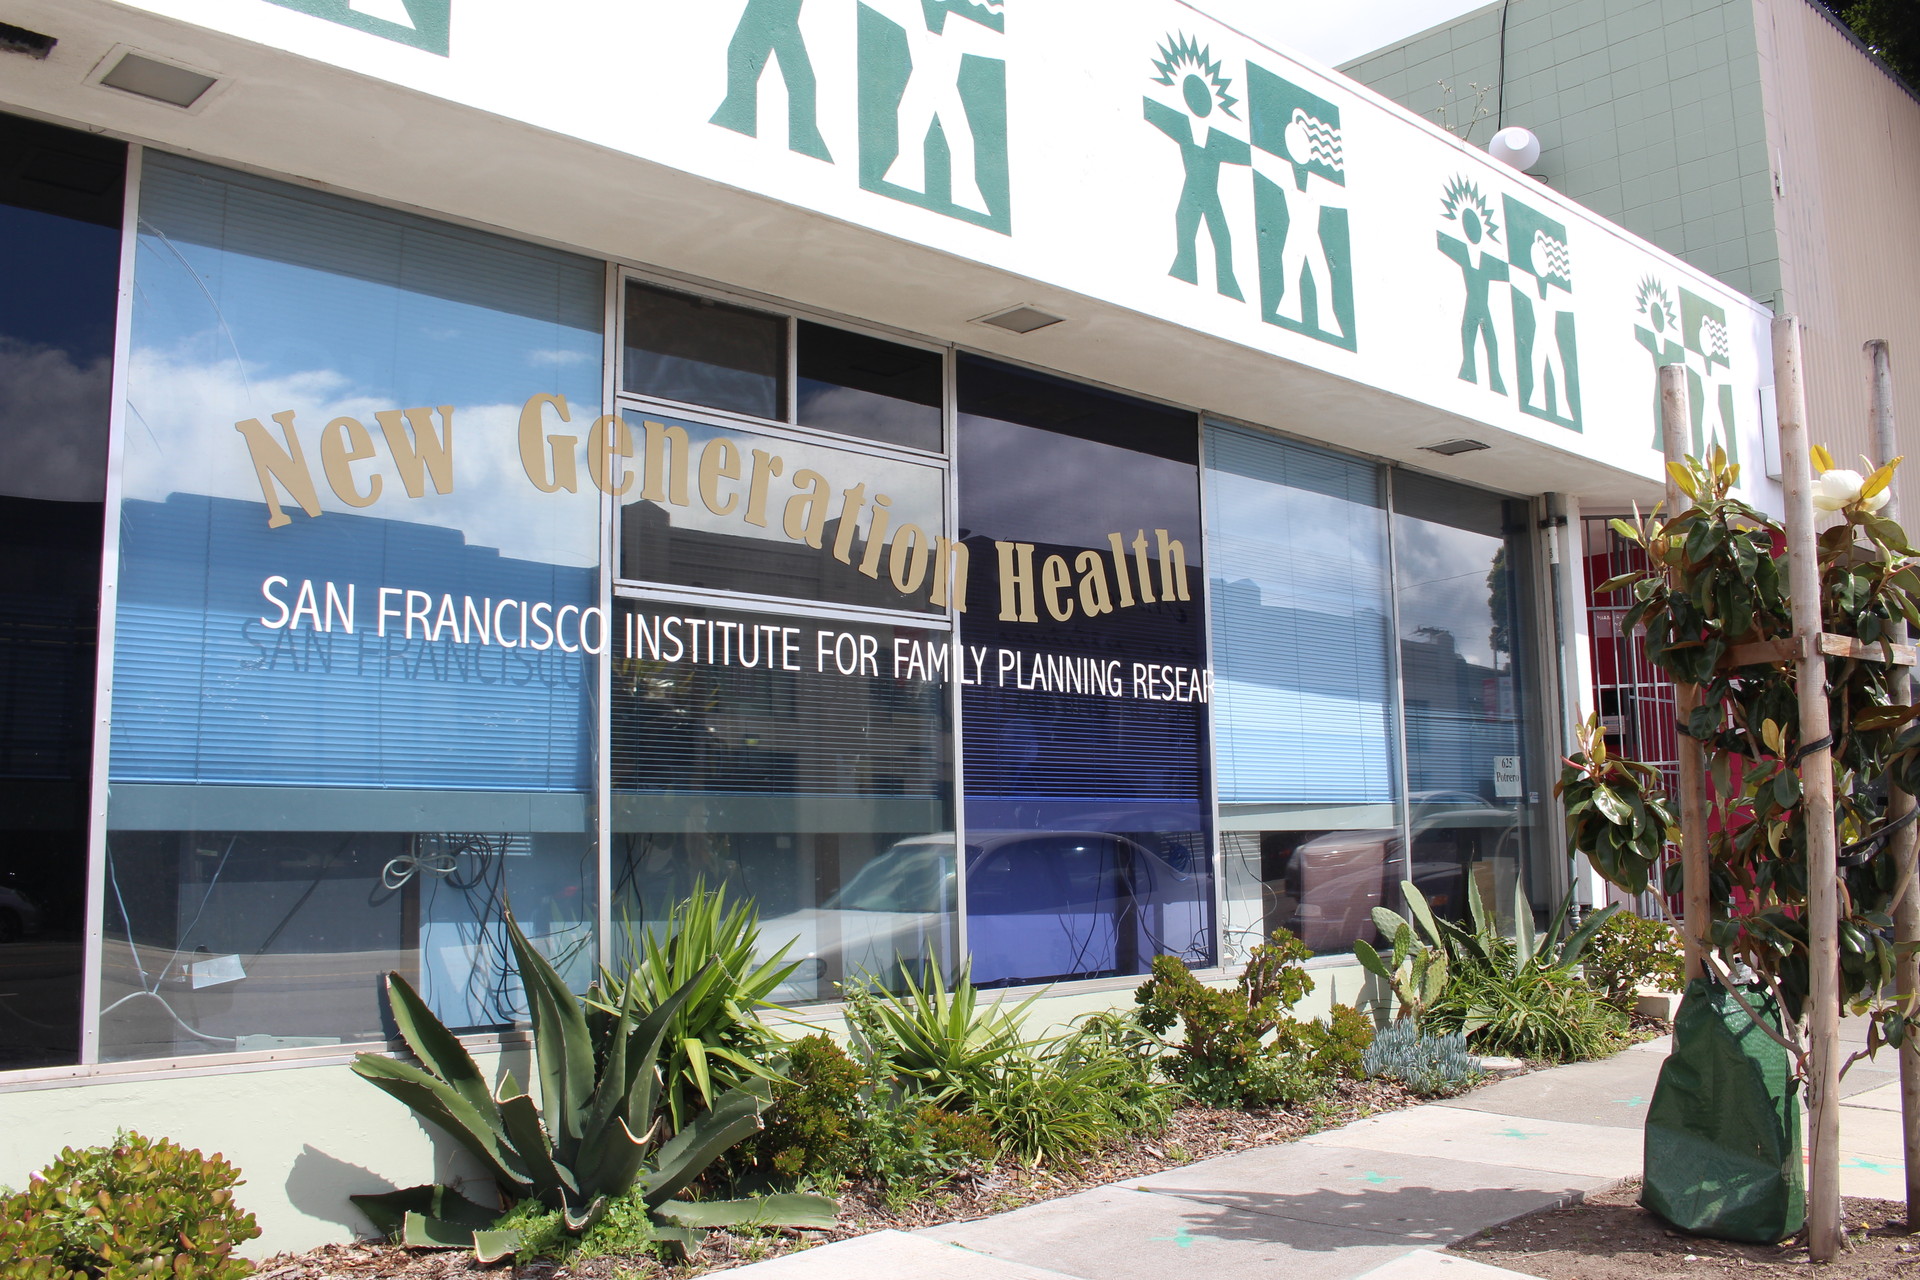 More than 2,200 patients will be affected by UCSF plans to close the New Generation Health Center on July 31. The youth-oriented family planning clinic will be open for appointments until July 22. 